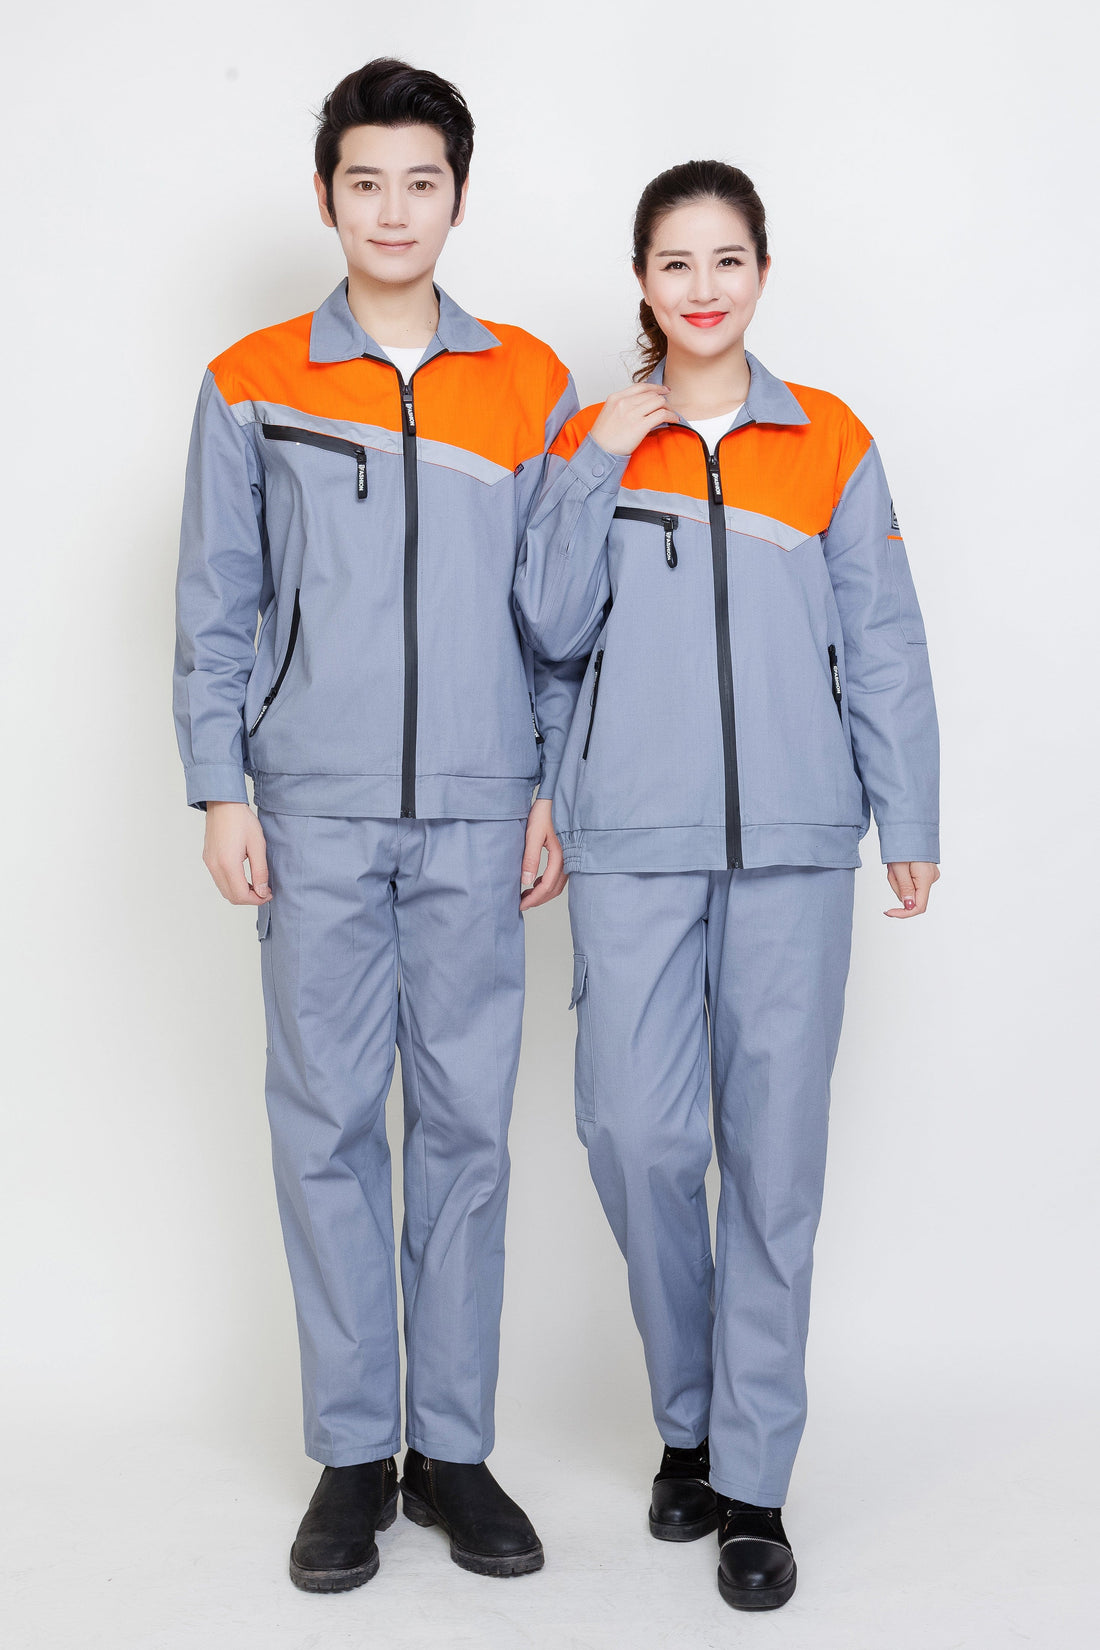 Corals Trading Co. 可樂思百貨商行 涤棉抗静电 Spring and Autumn style long-sleeved anti-static work clothes series SD-AS-W404